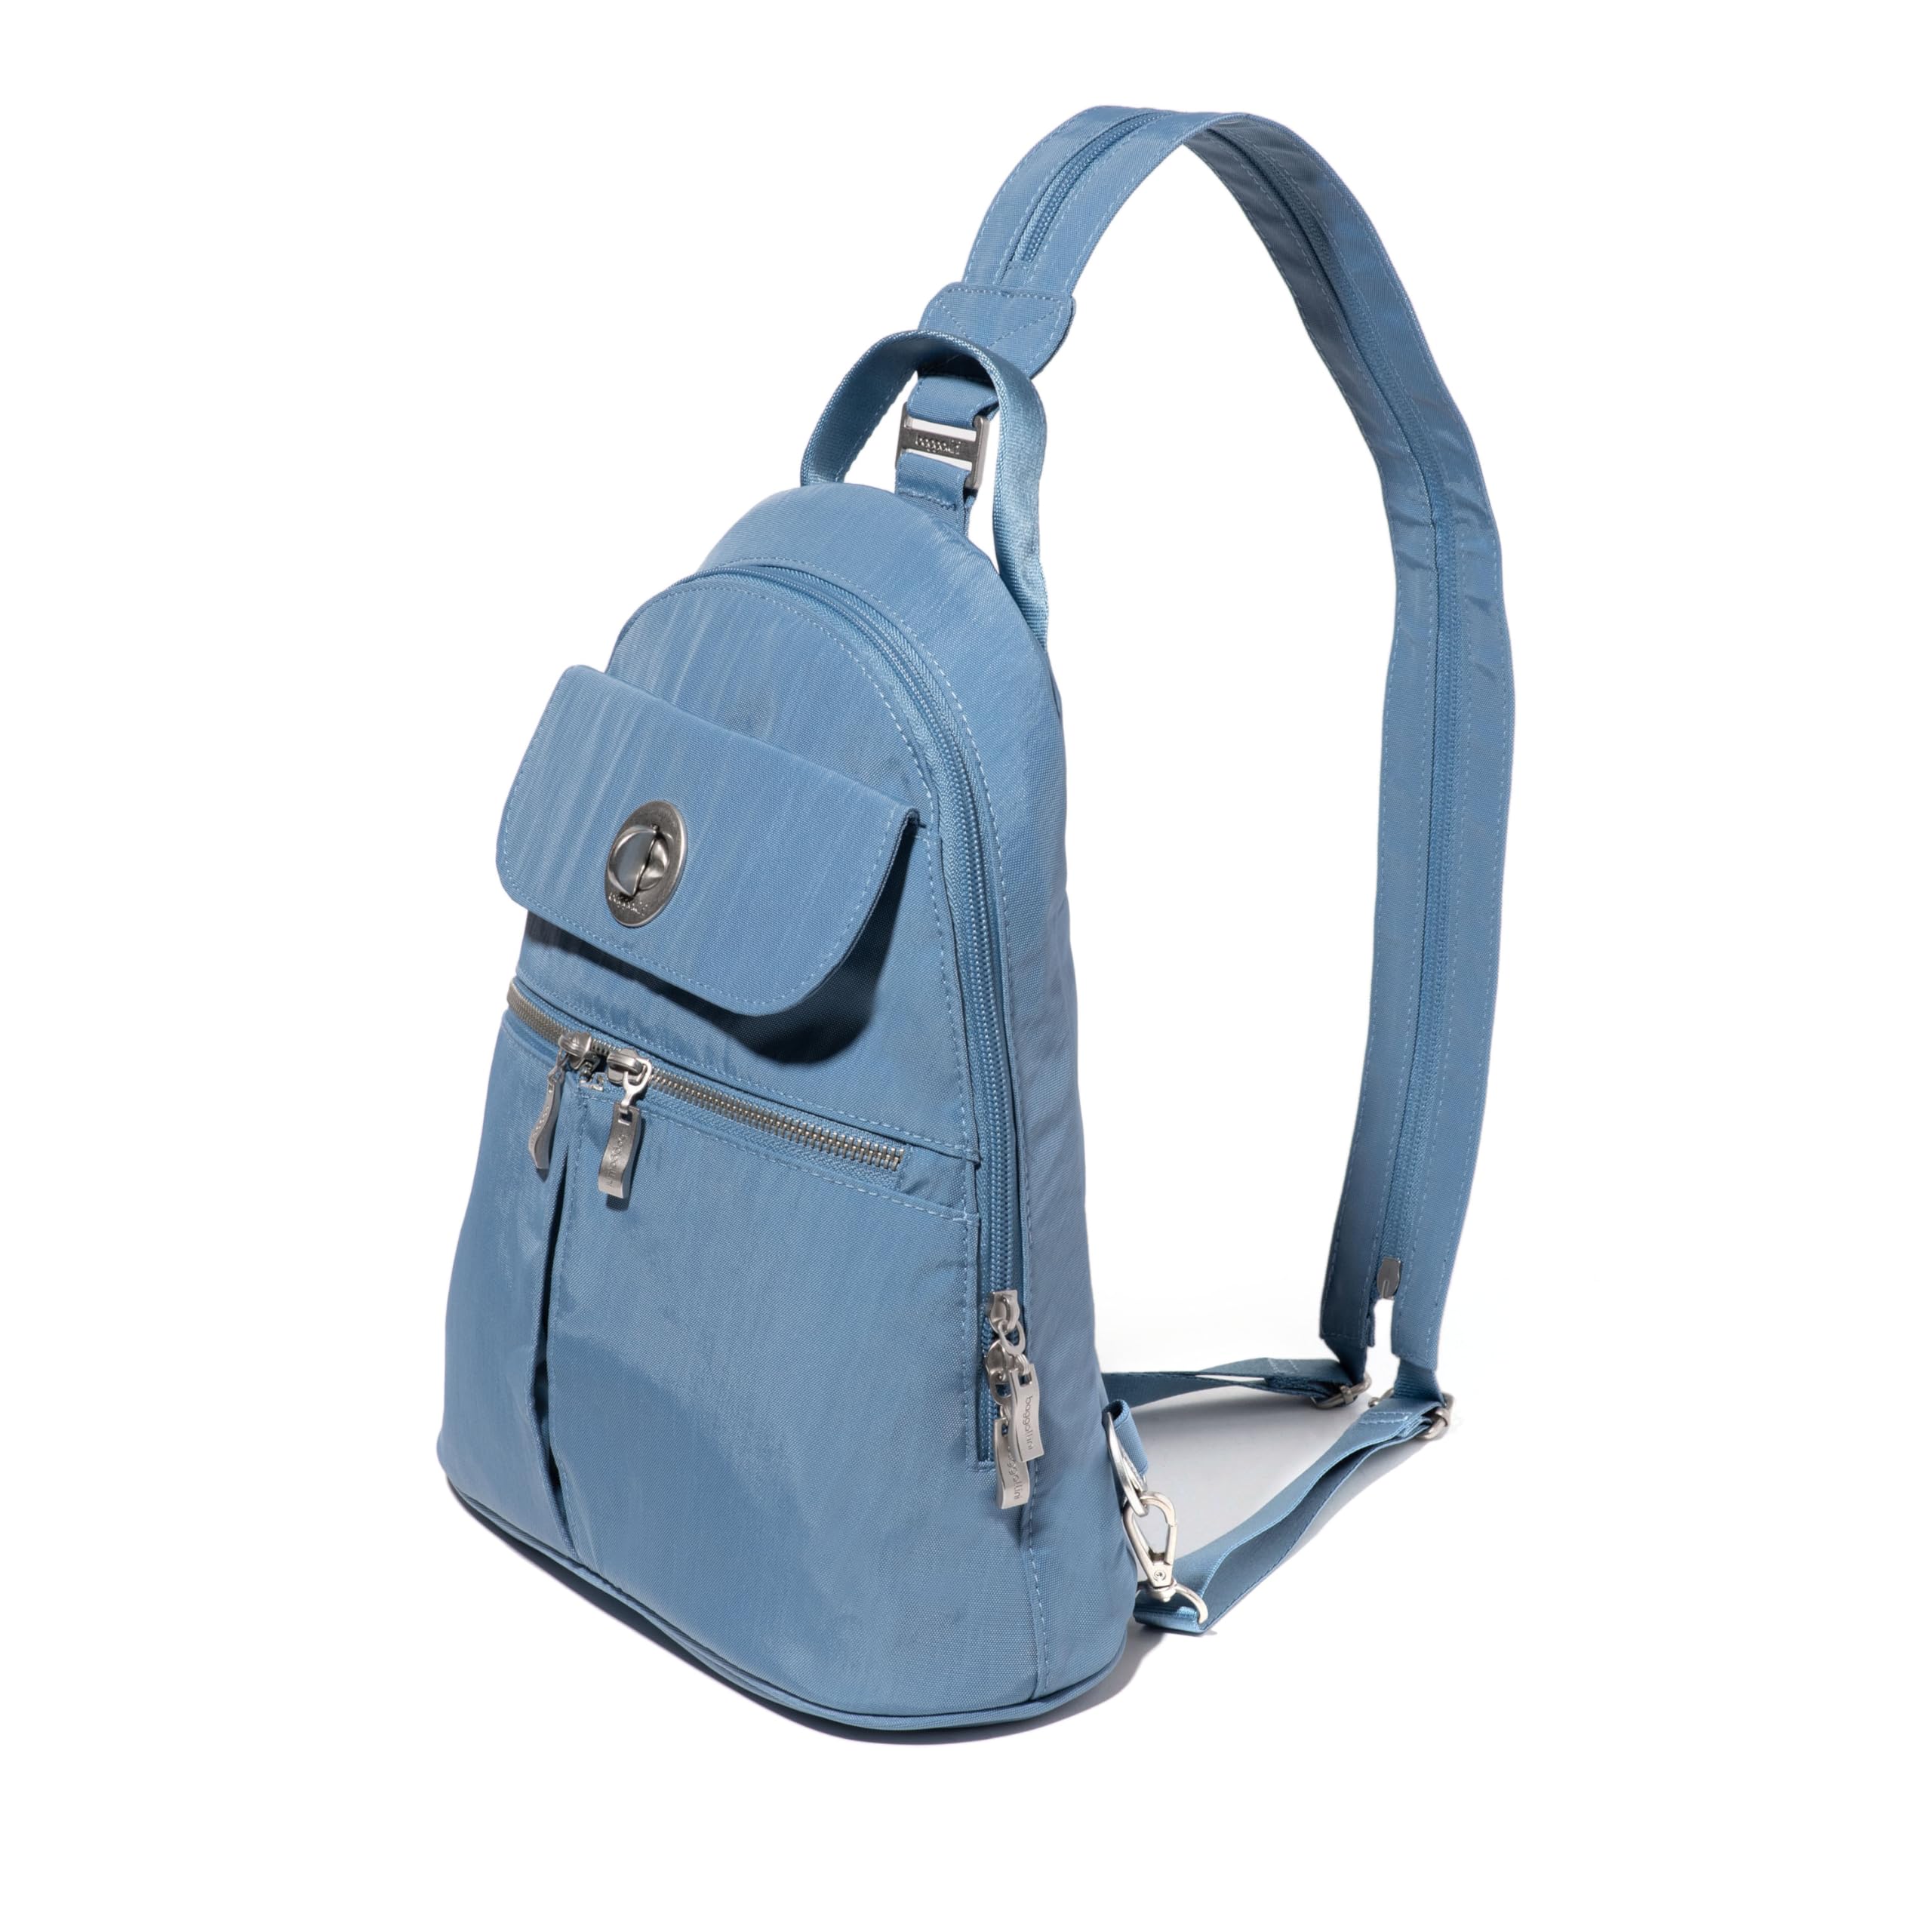 Baggallini Naples Convertible Backpack - Convertible Sling Bag for Women with Adjustable Shoulder Straps